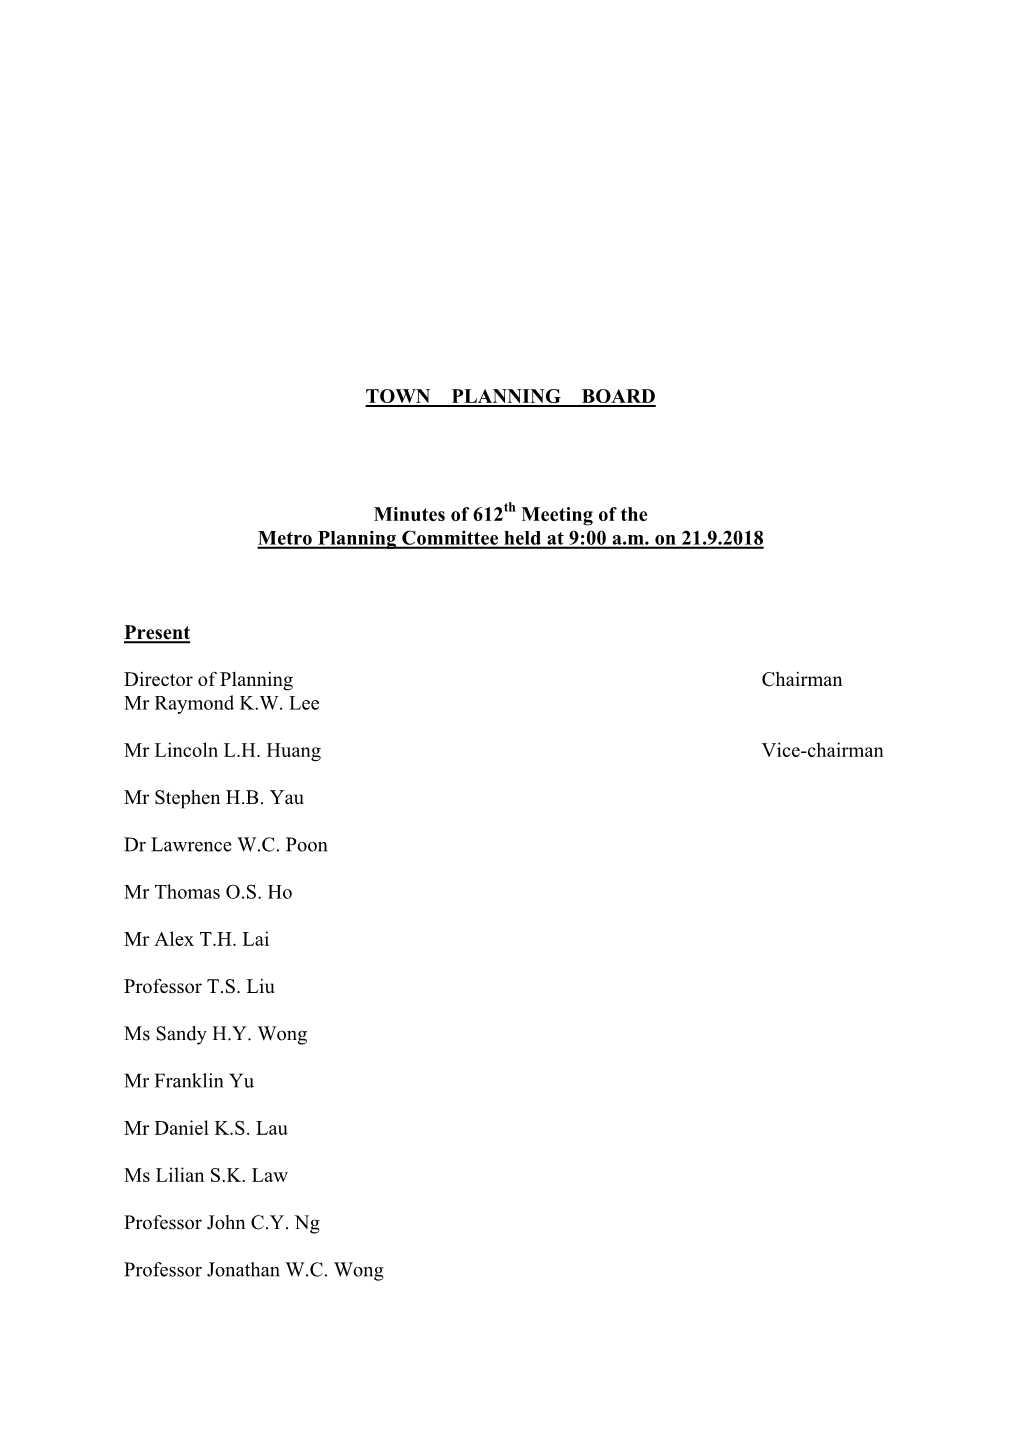 TOWN PLANNING BOARD Minutes Of